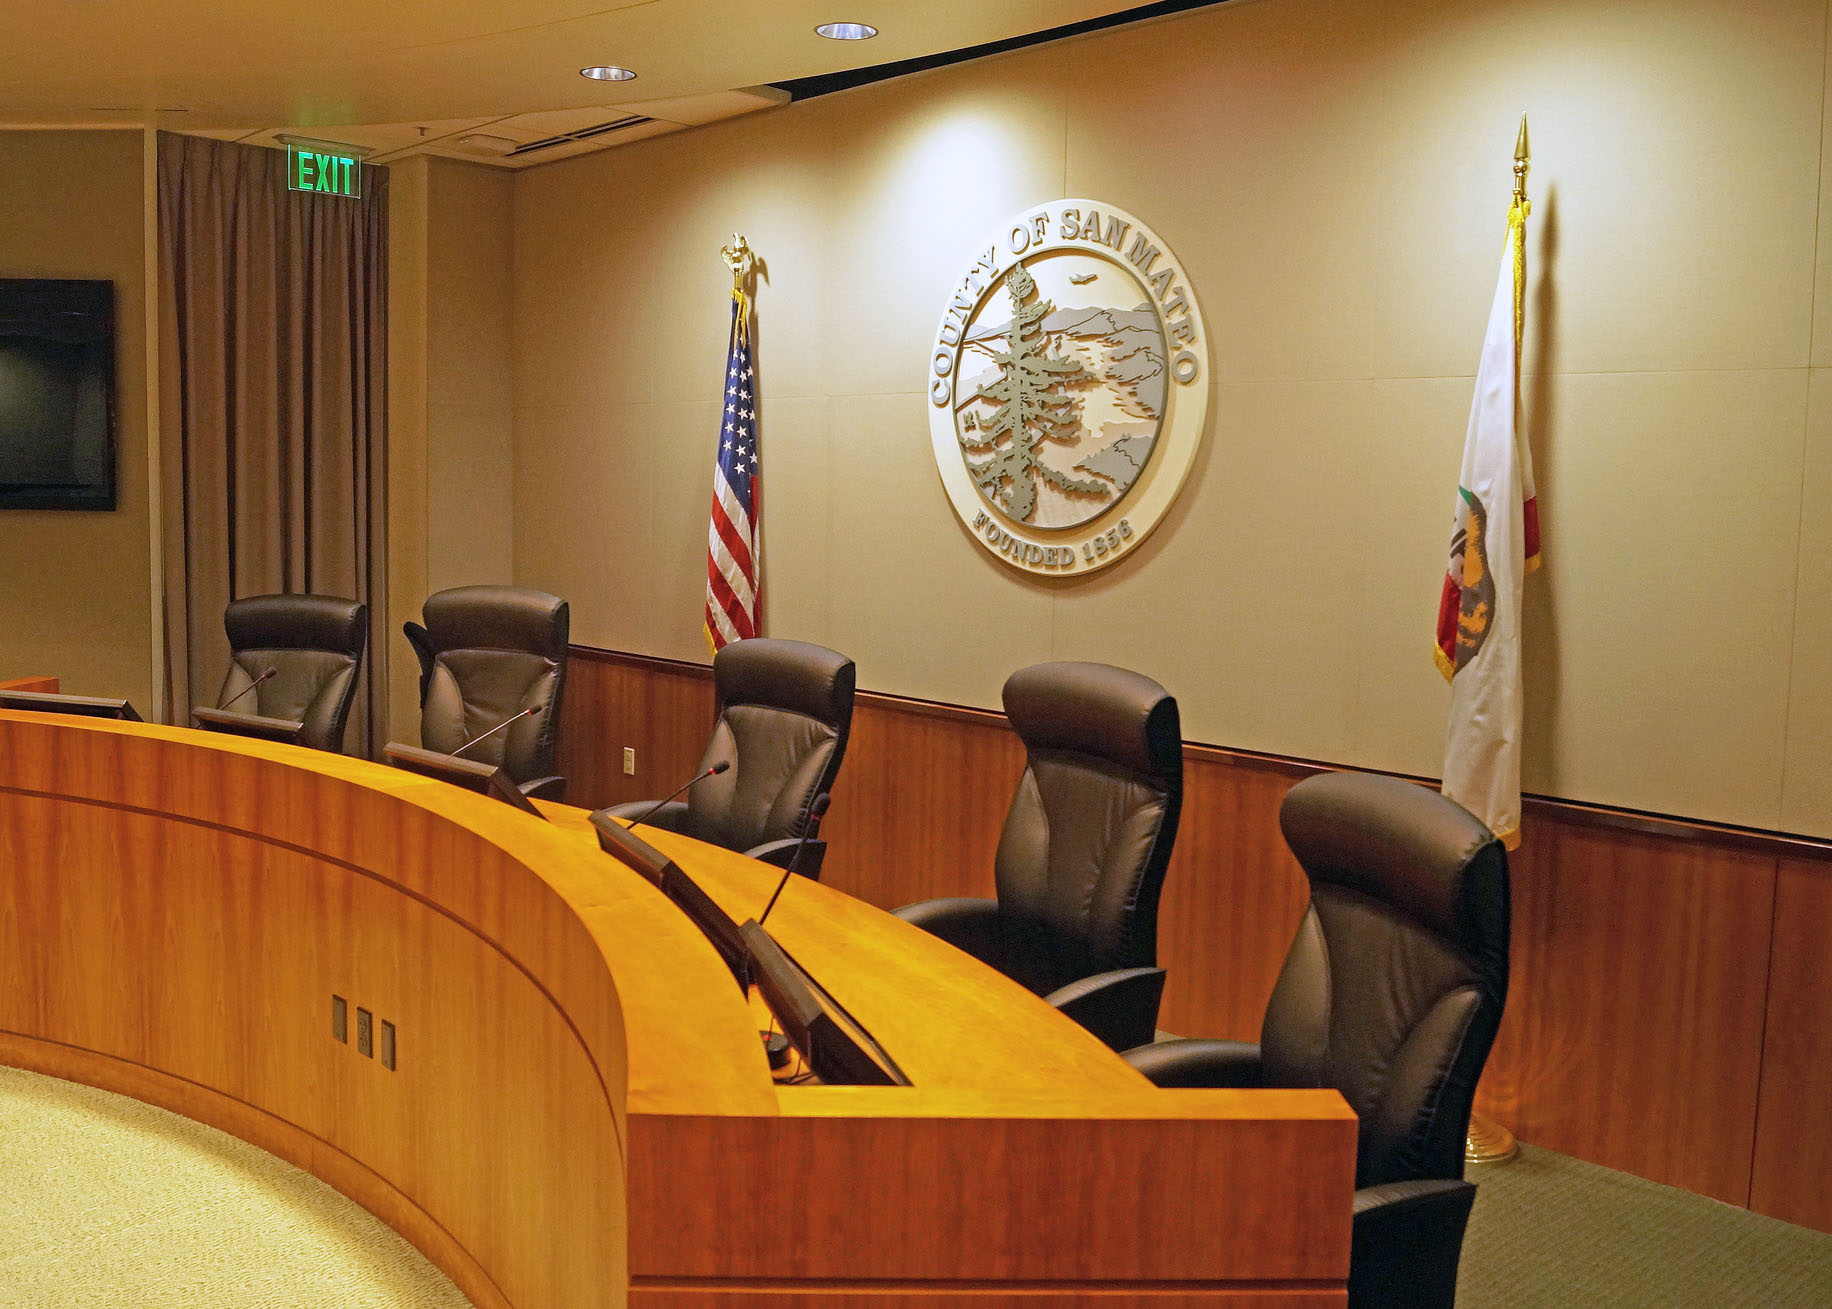 San Mateo County Board of Supervisors to resume in-person meetings starting May 3